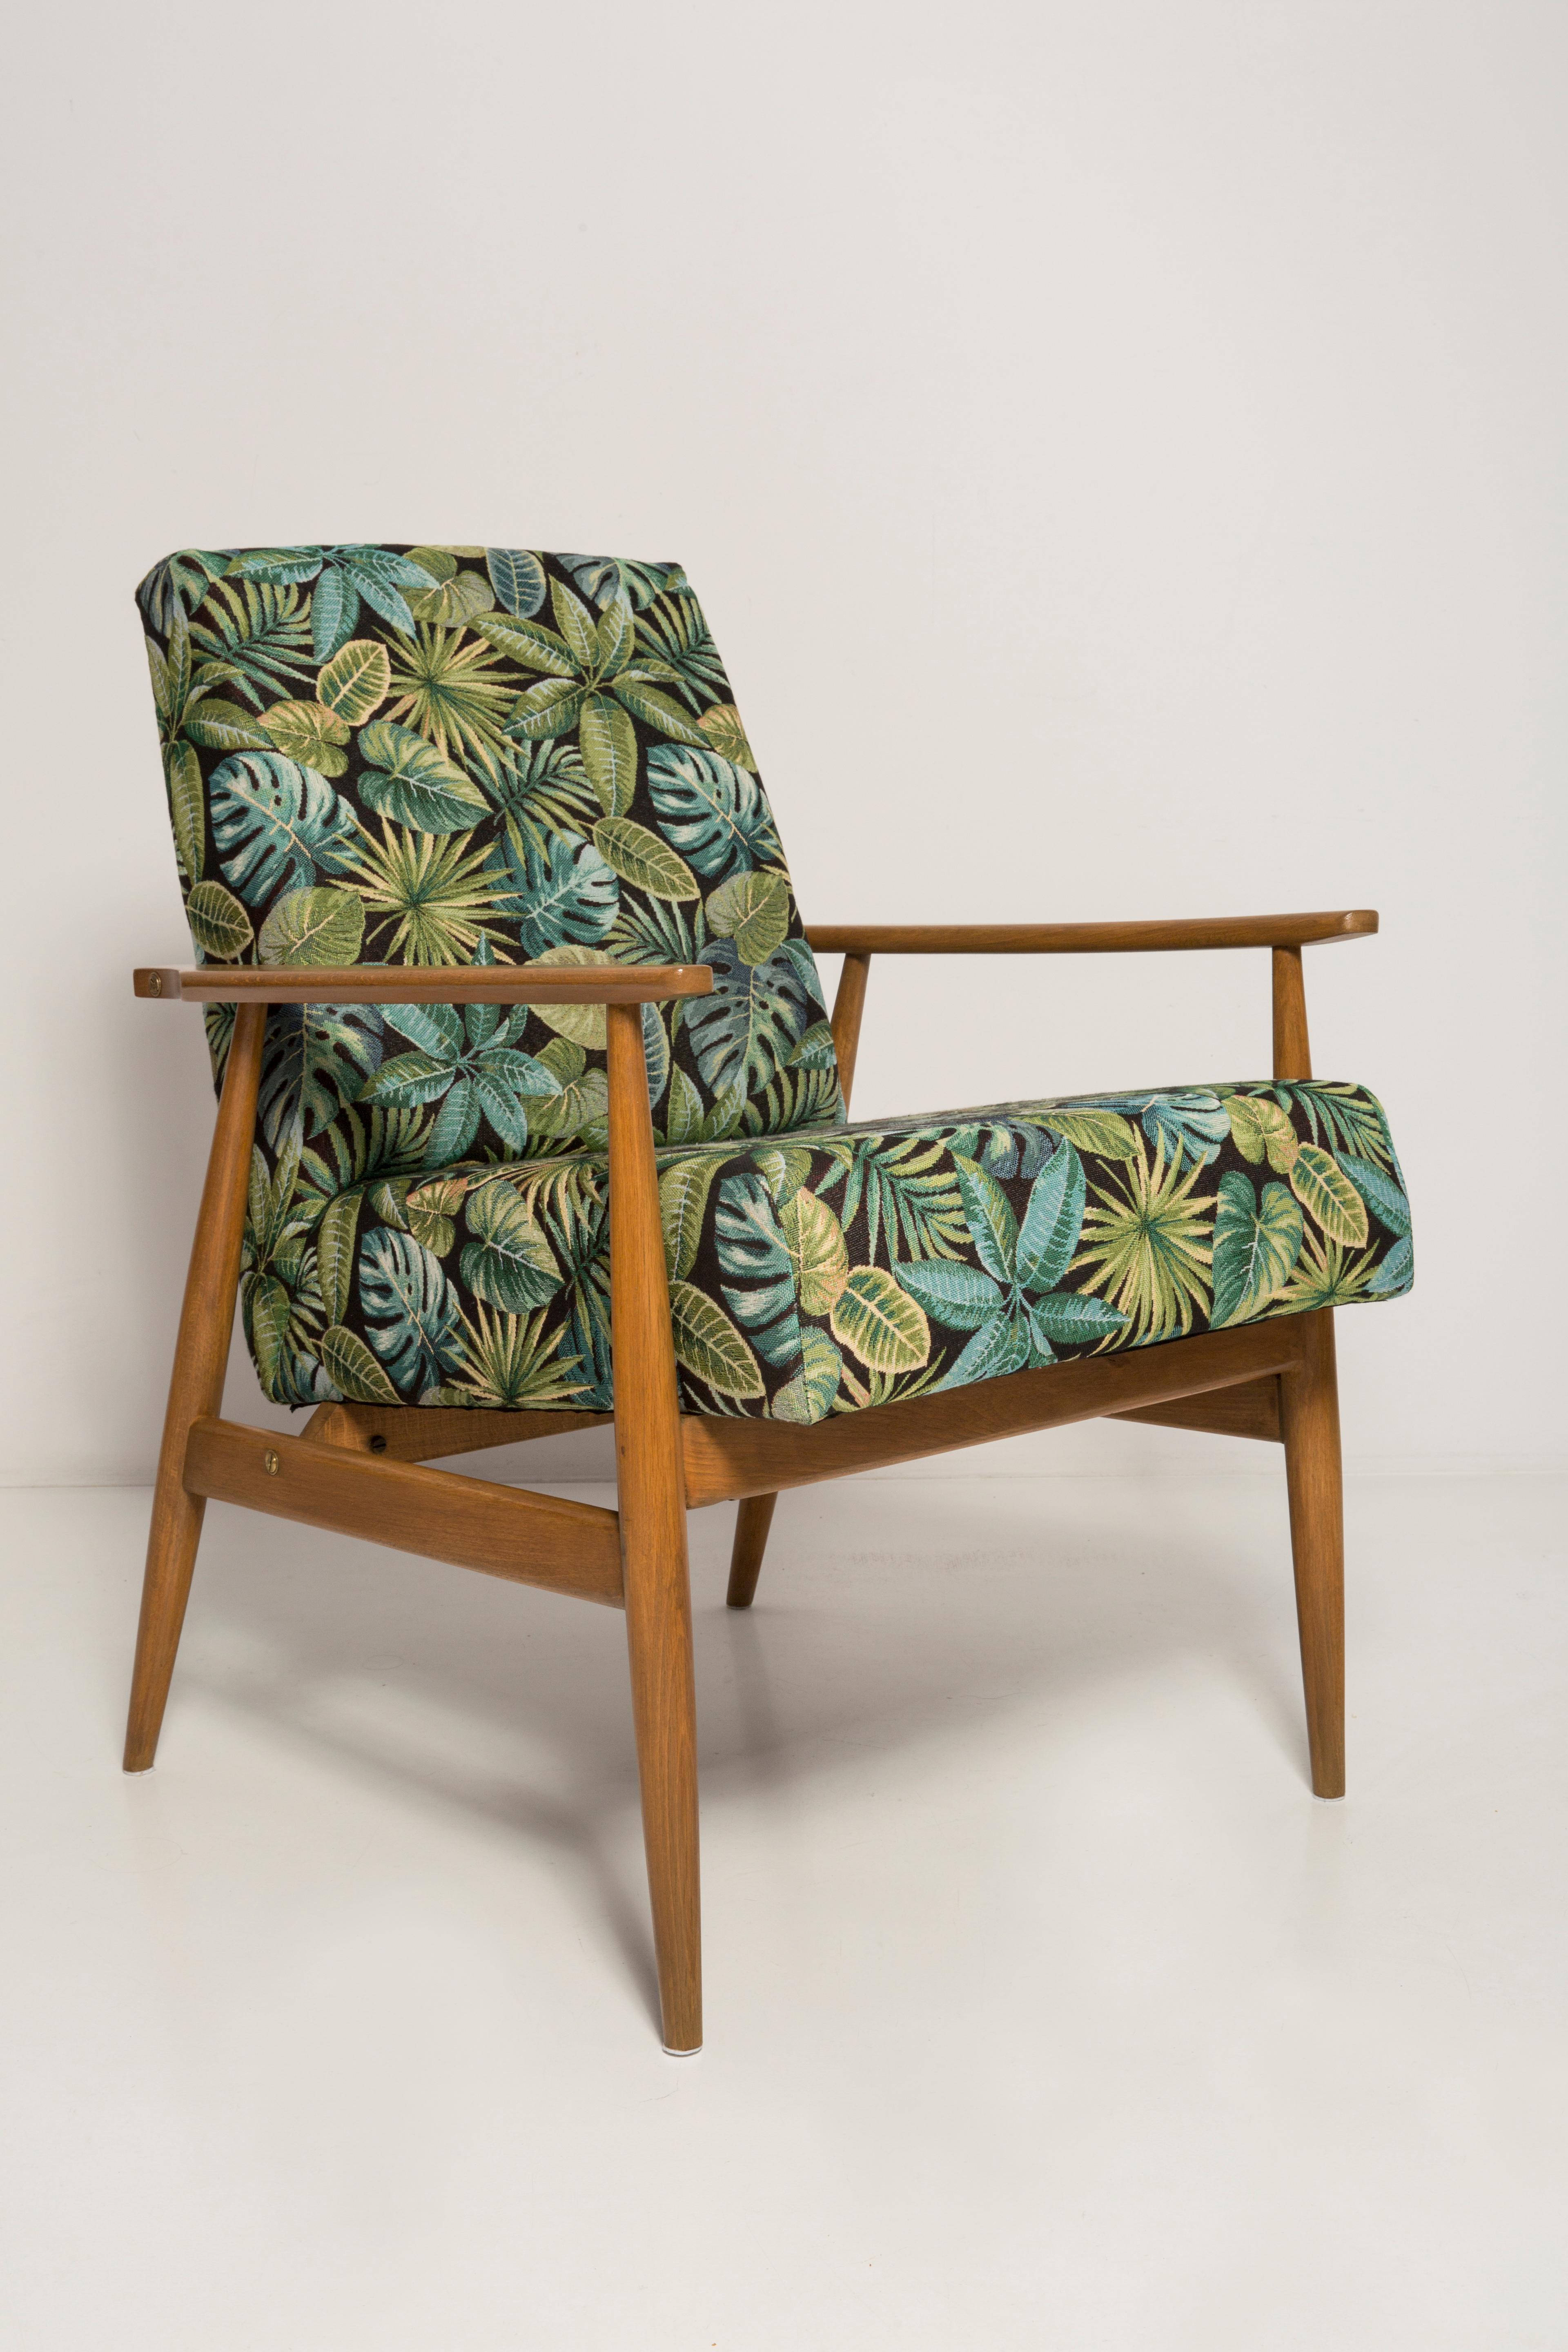 Hand-Crafted Mid-Century Green Leaves Jacquard Dante Armchair, H. Lis, 1960s For Sale